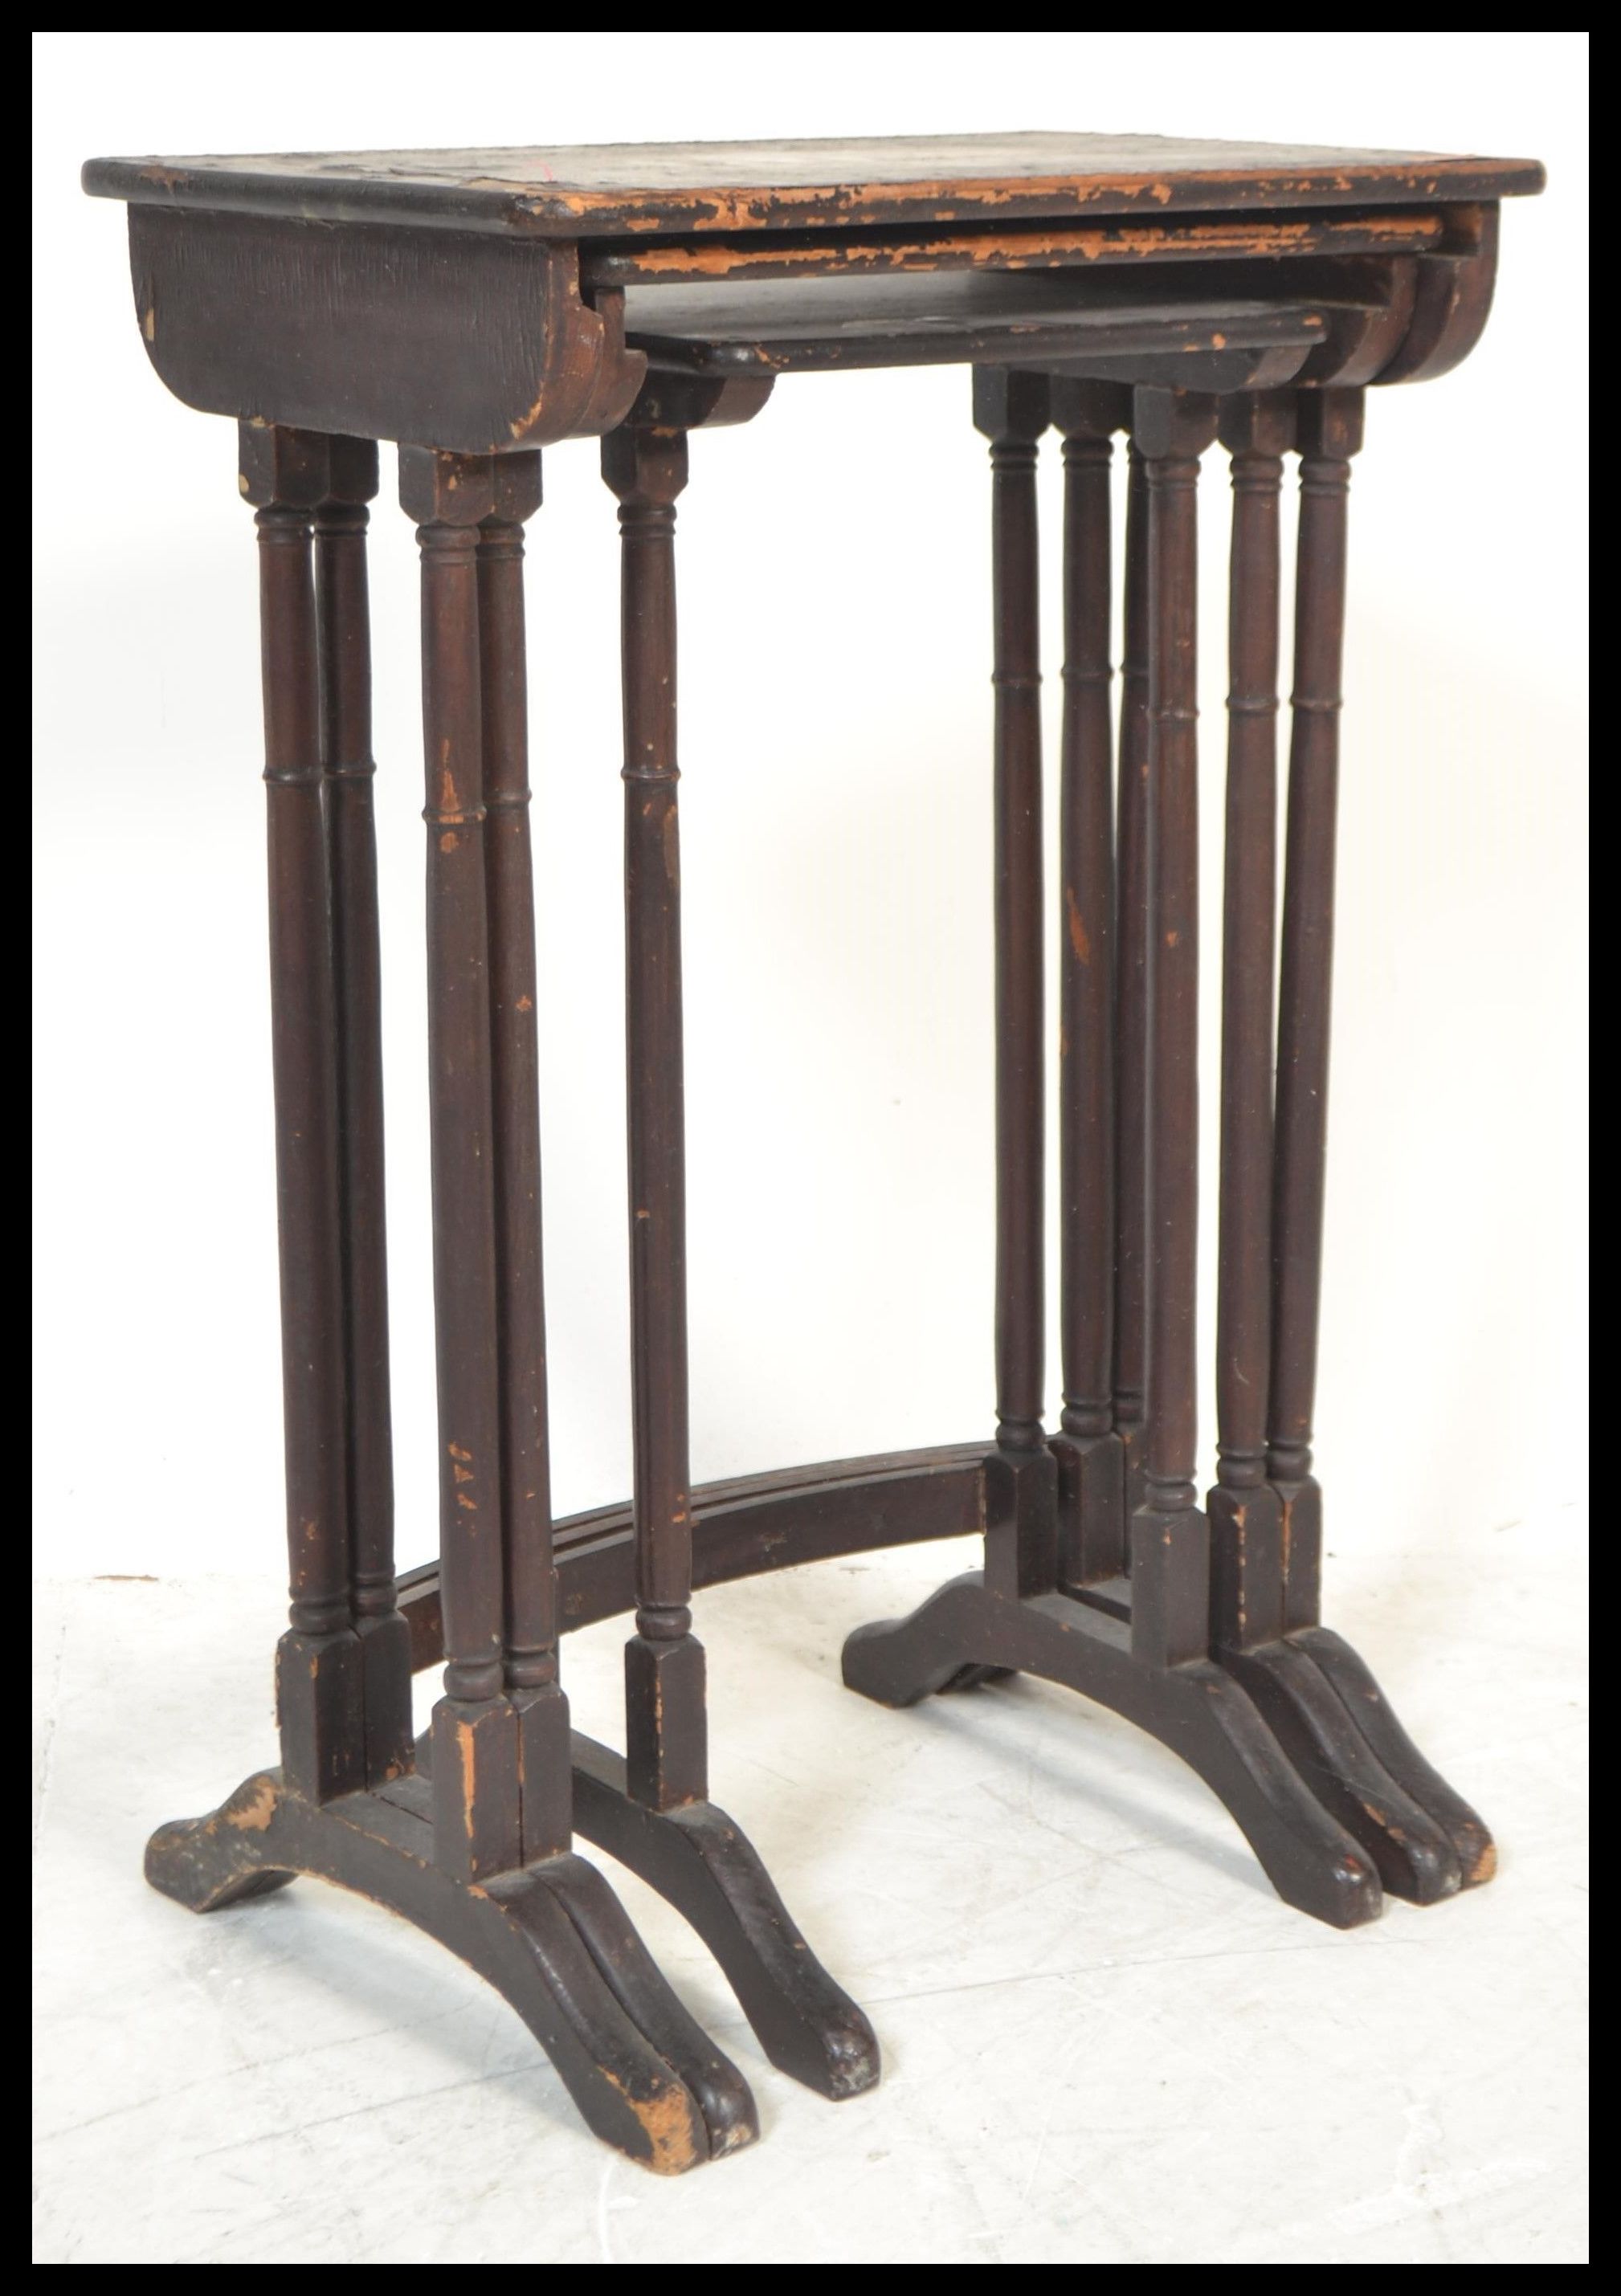 A 19th Century nest of three graduating Japanese silvered black lacquer tables, the tops with pagoda